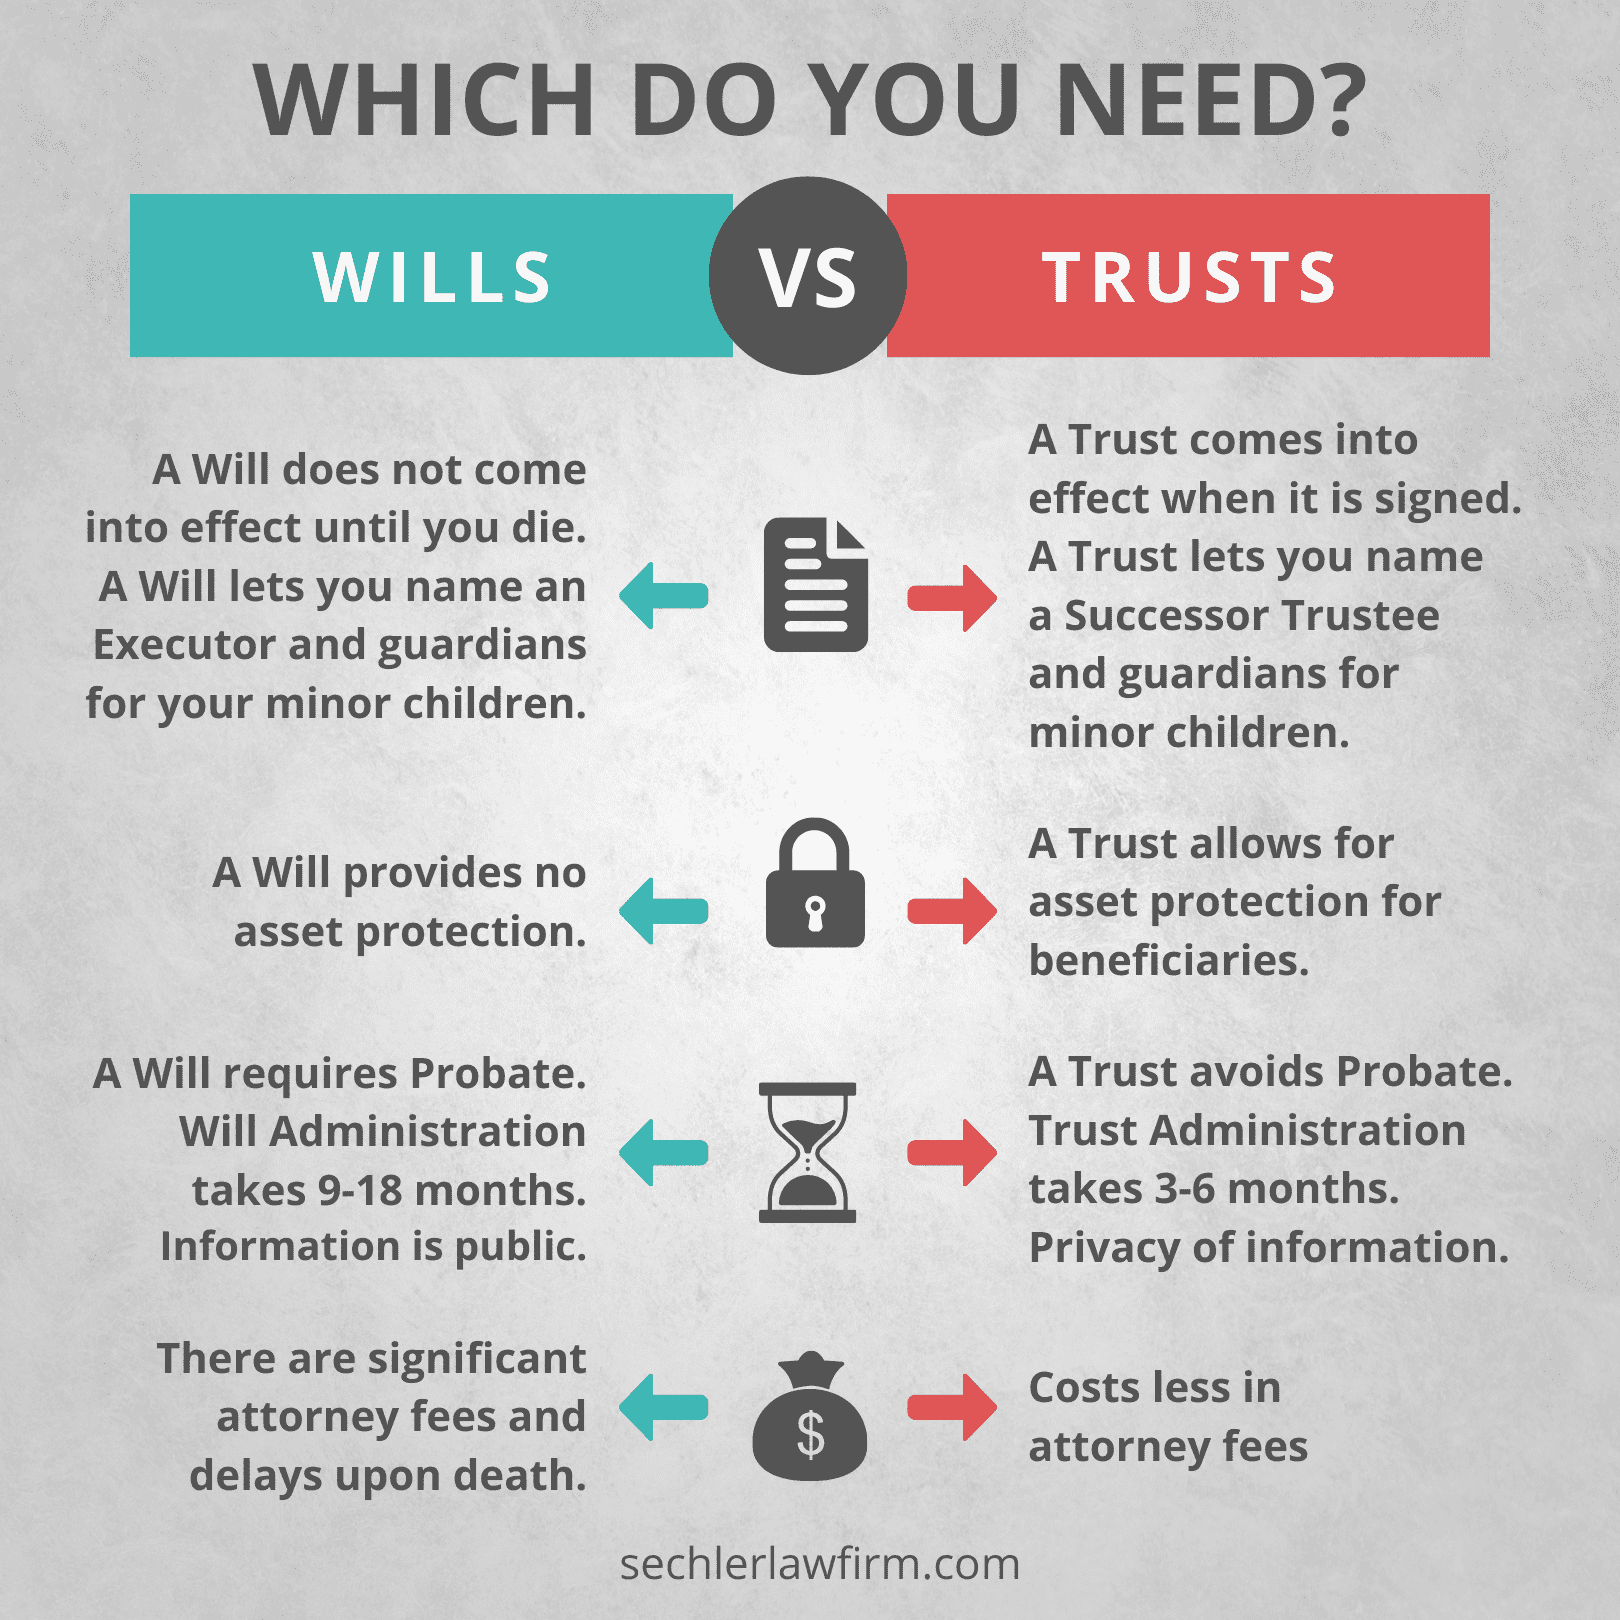 Wills or Trusts? Which do you need?